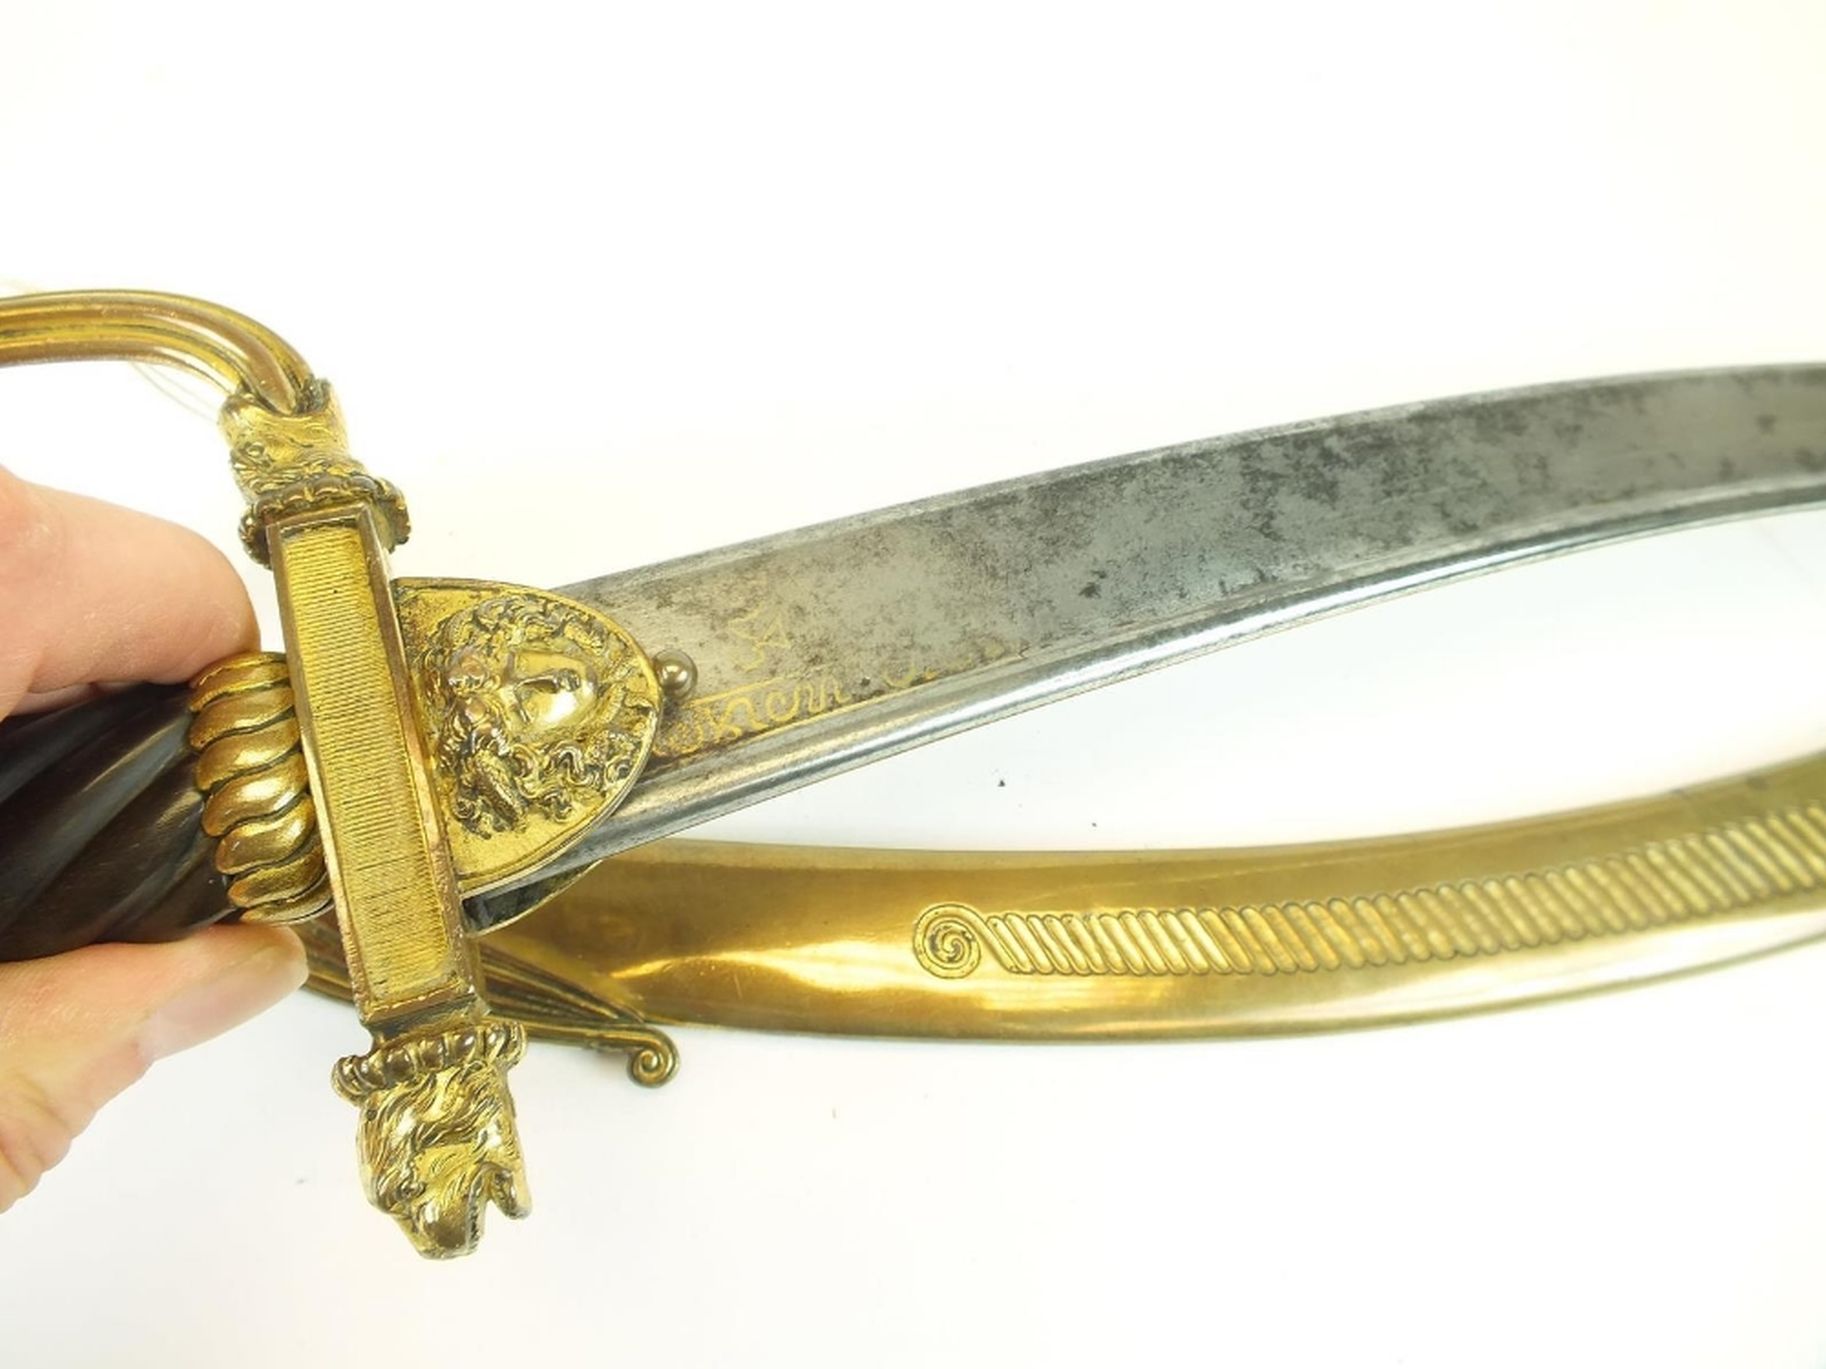 A LATE 18TH OR EARLY 19TH CENTURY PRESENTATION QUALITY SABRE BY PROSSER, 83cm sharply curved pipe- - Image 16 of 18